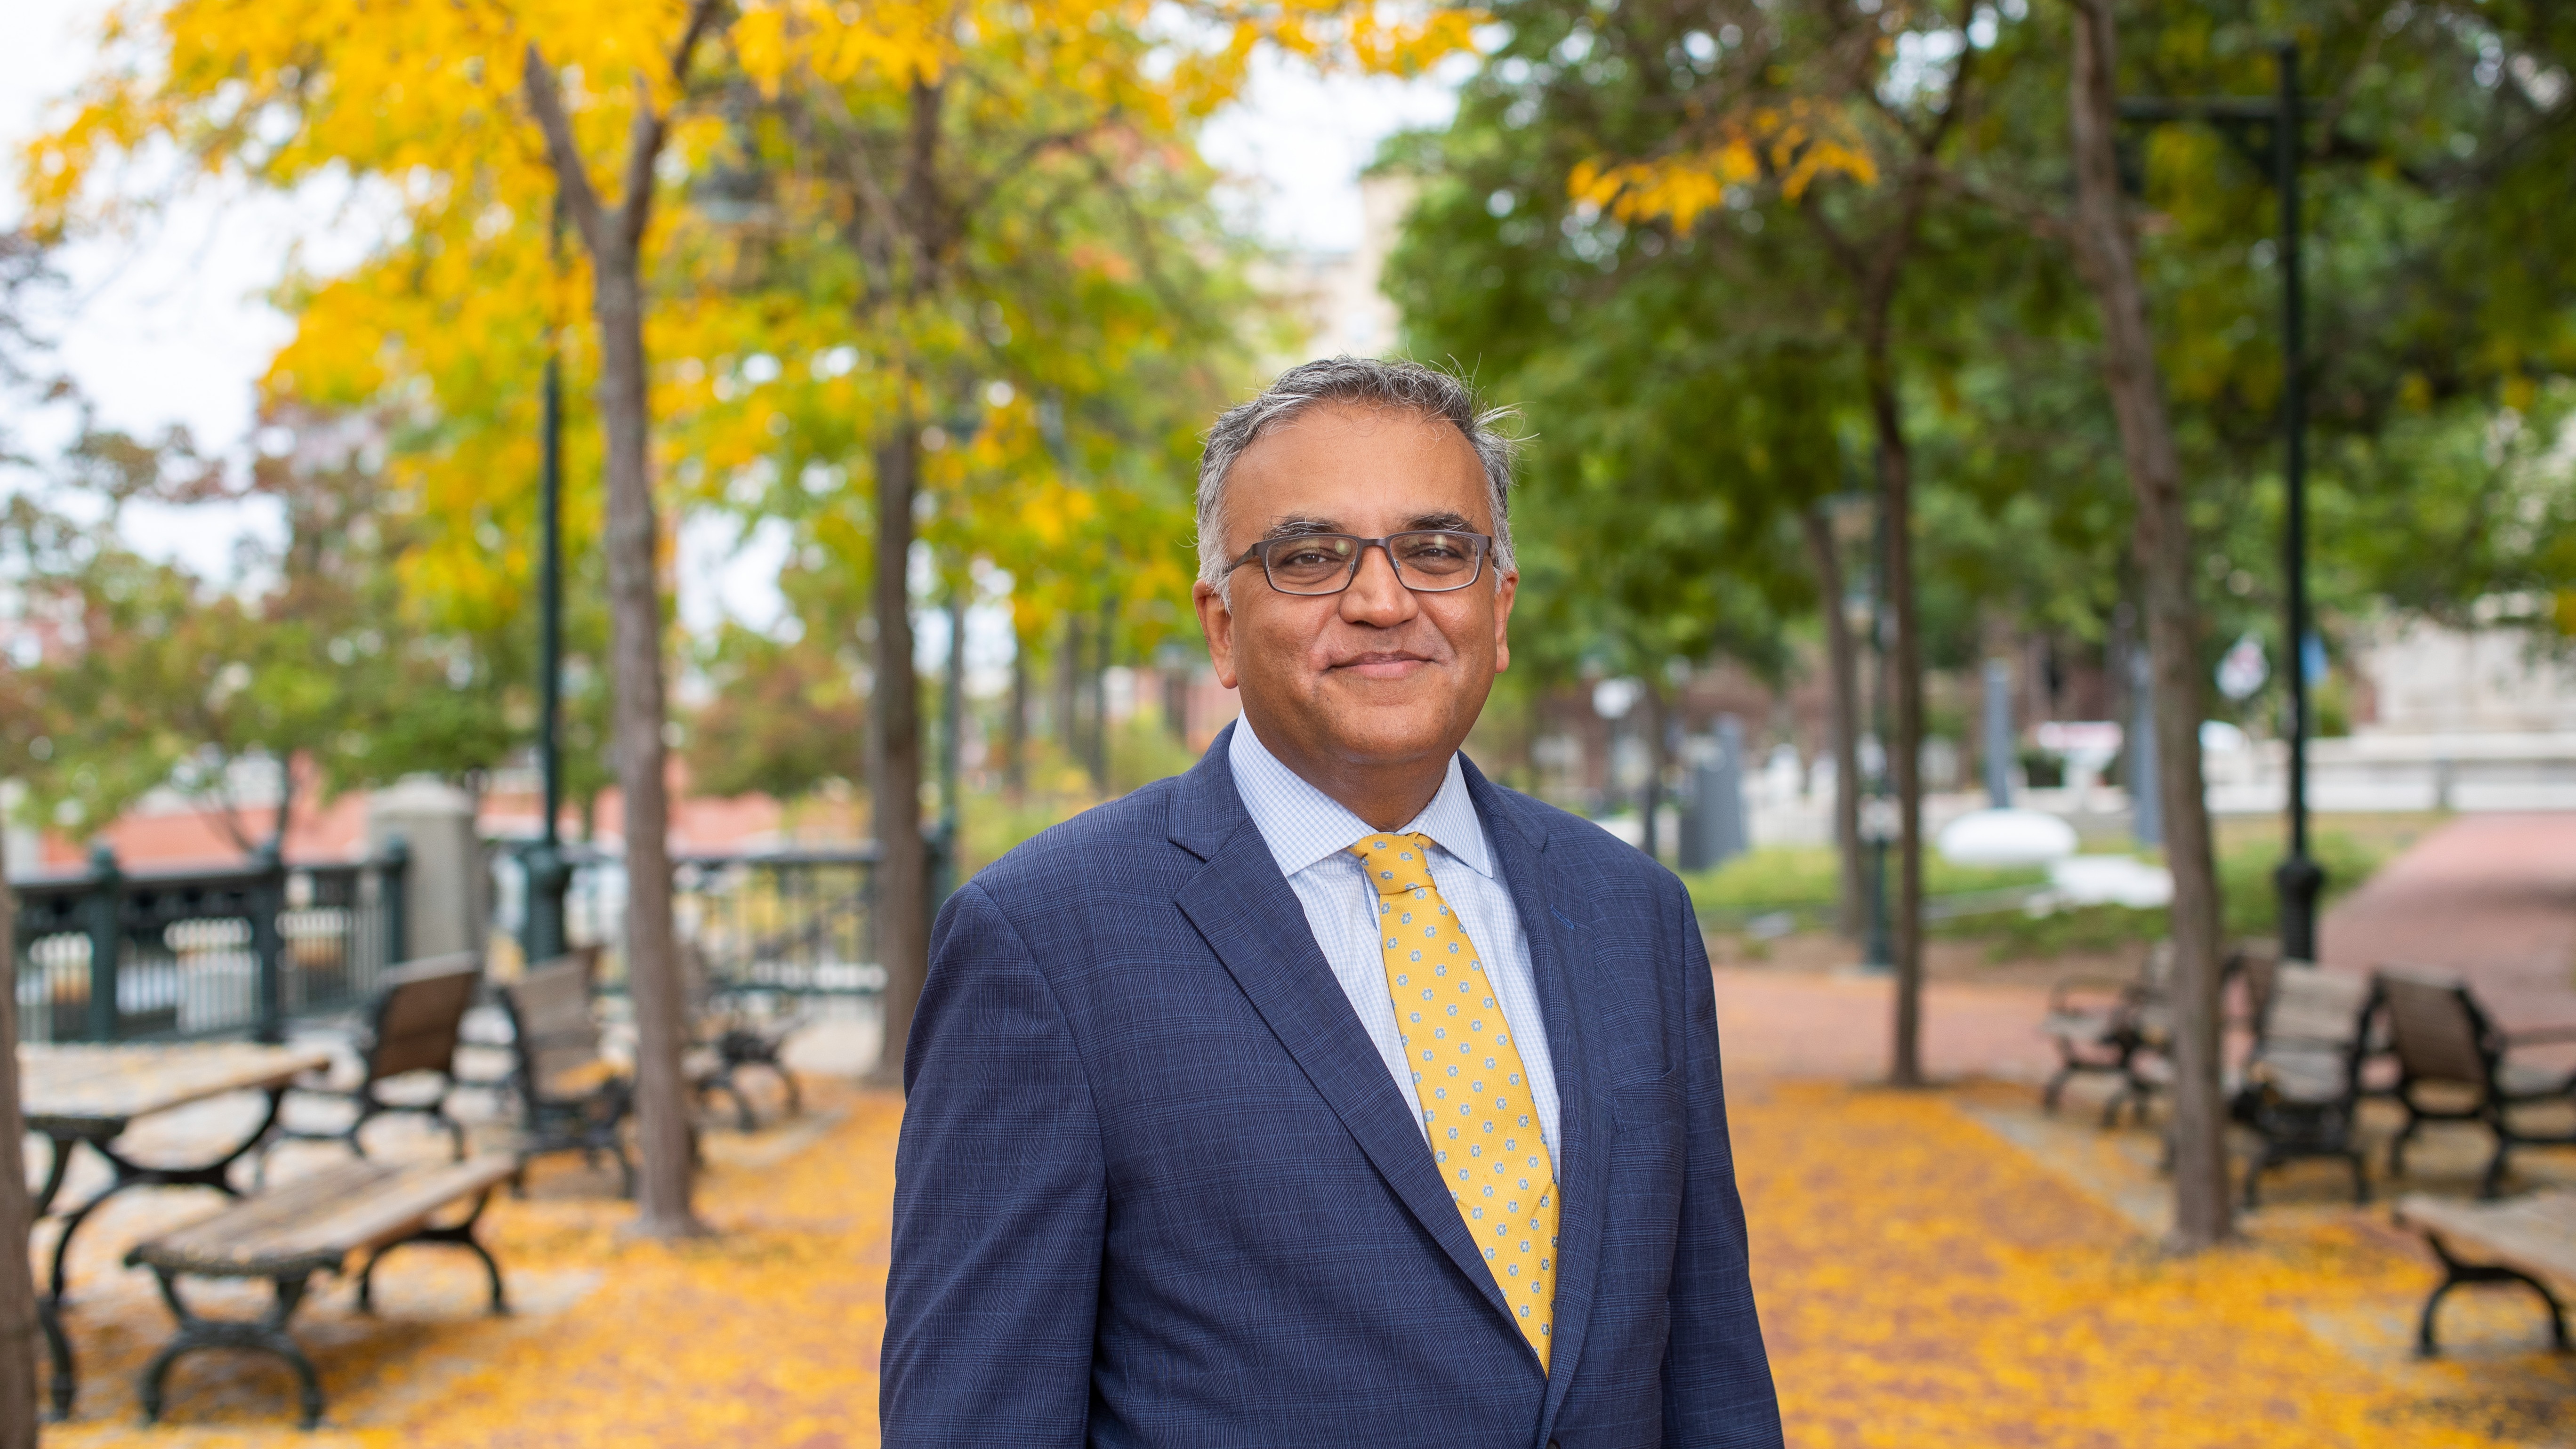 Dr. Ashish Jha, former White House COVID advisor and current dean of Brown University’s School of Public Health.